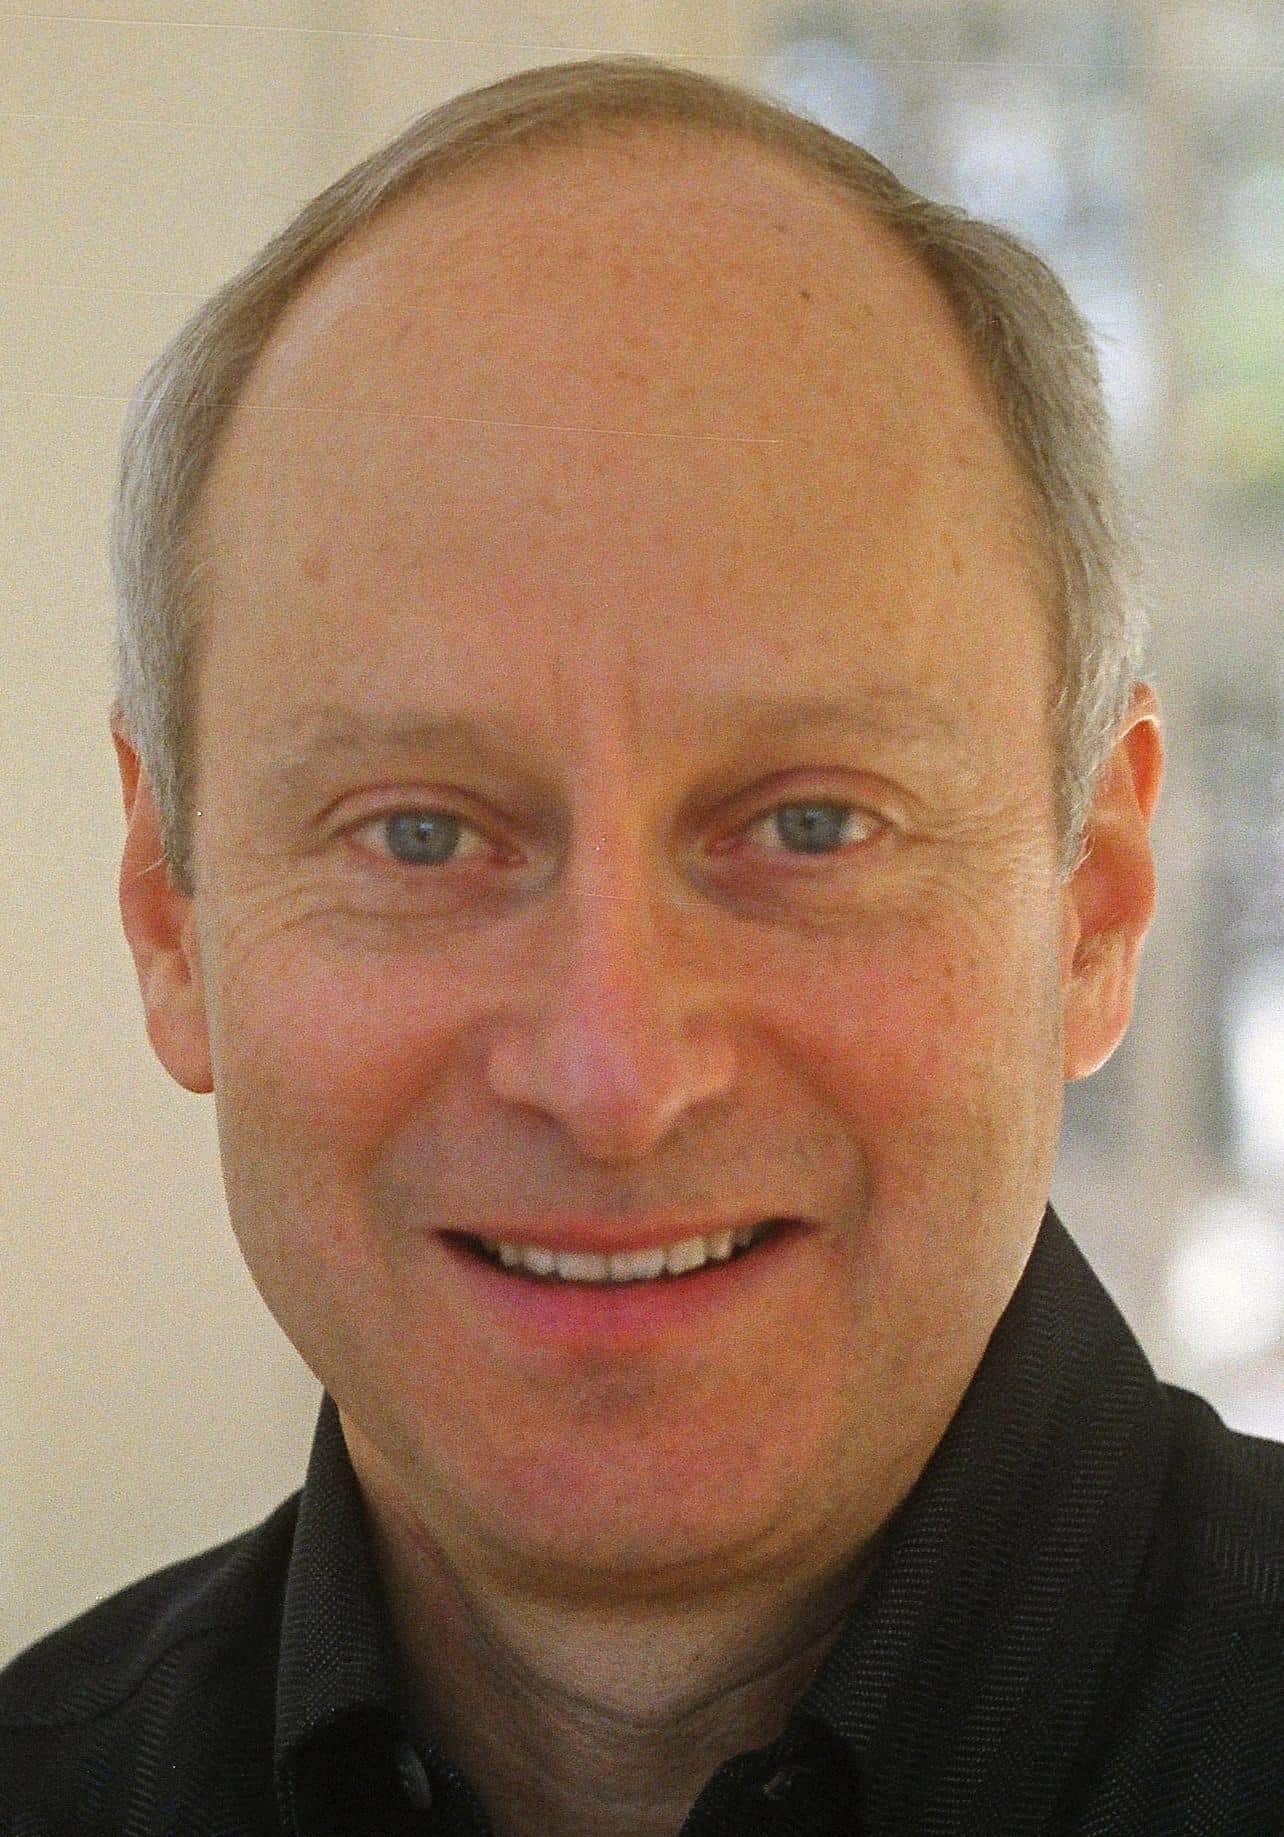 May 9 — An Evening with Michael Sandel in conversation with Patt Morrison